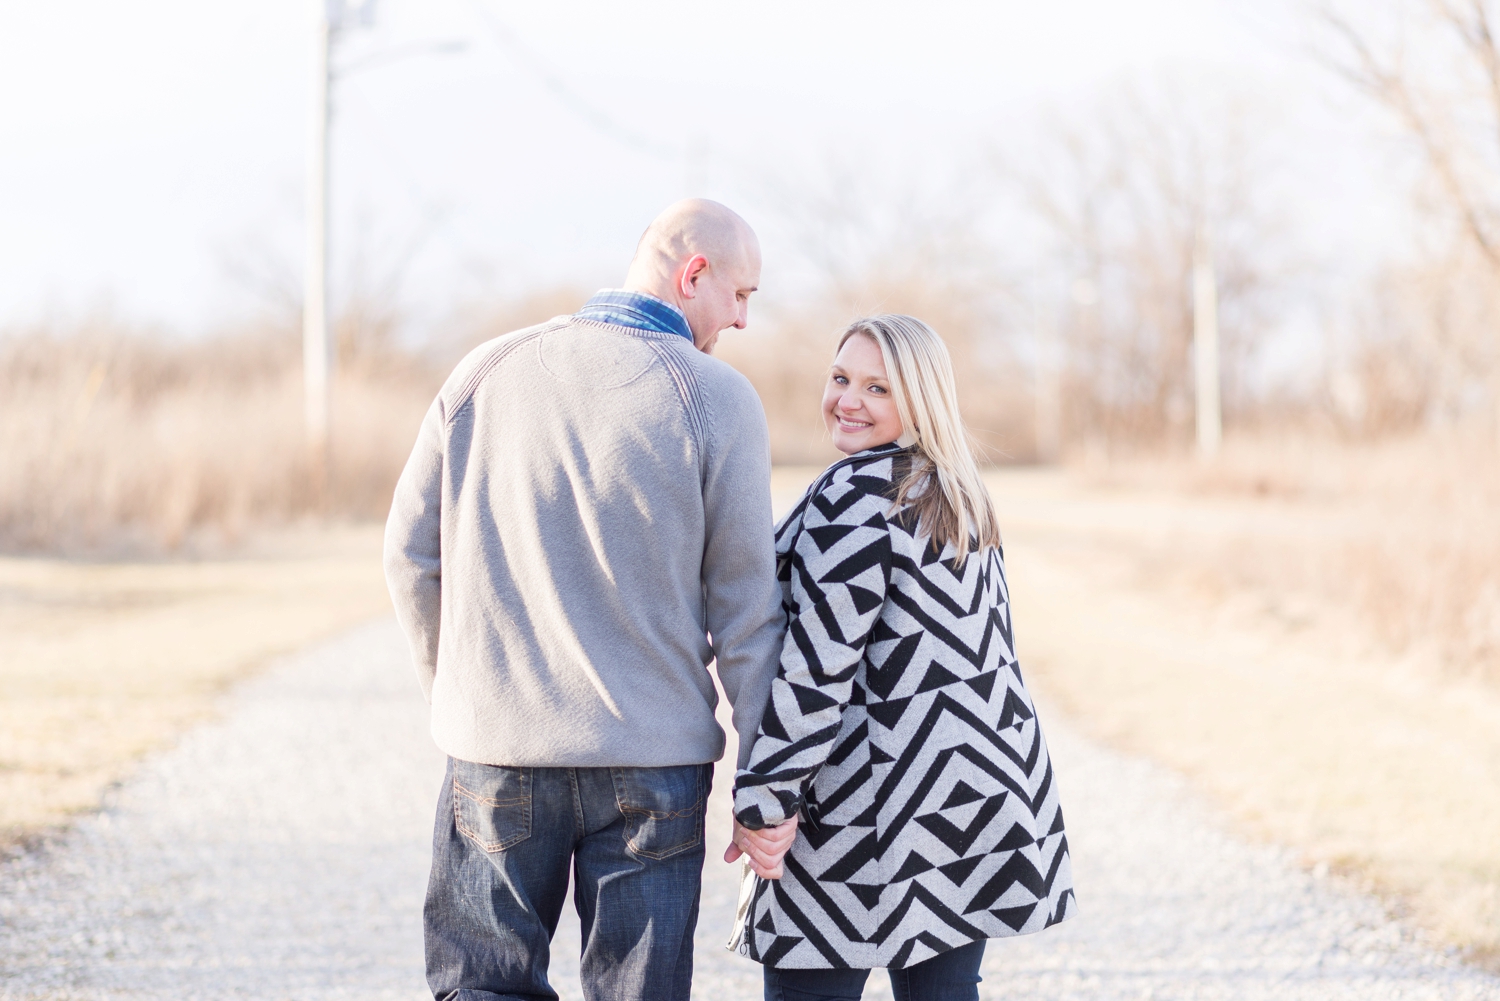 winter-engaged-couple-at-their-photo-session-at-the-scioto-audubon-park-near-grange-audubon-center-with-walkways-and-grass_0347